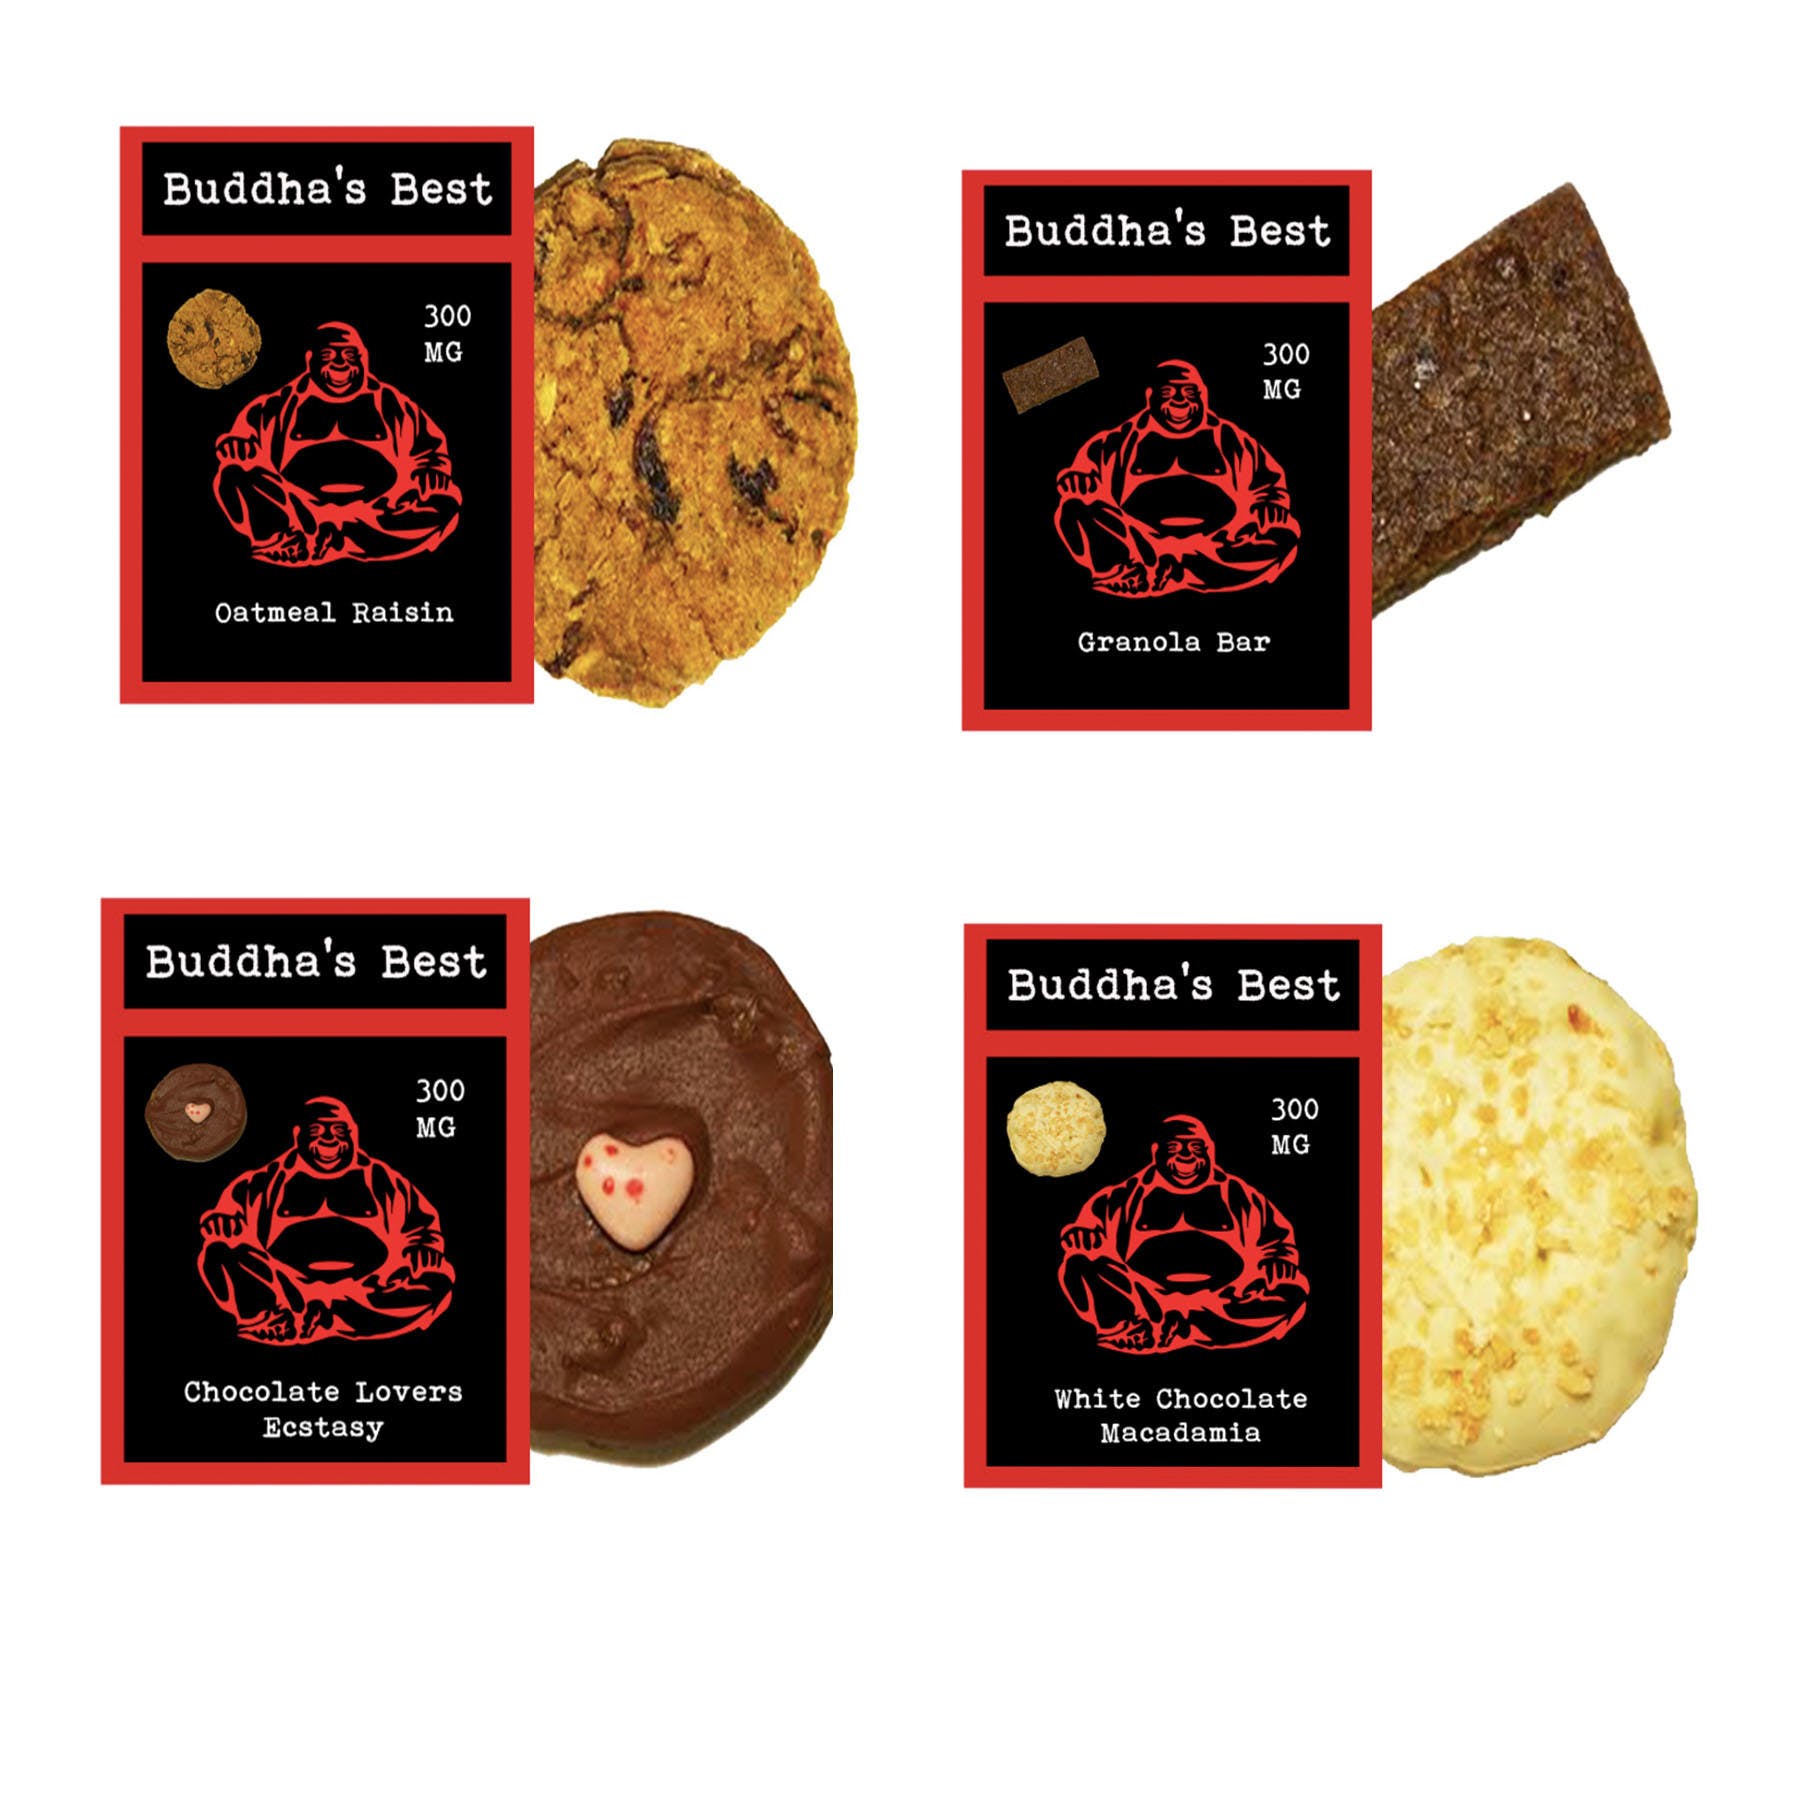 edible-buddhas-best-chocolate-lovers-ecstasy-cookie-300mg